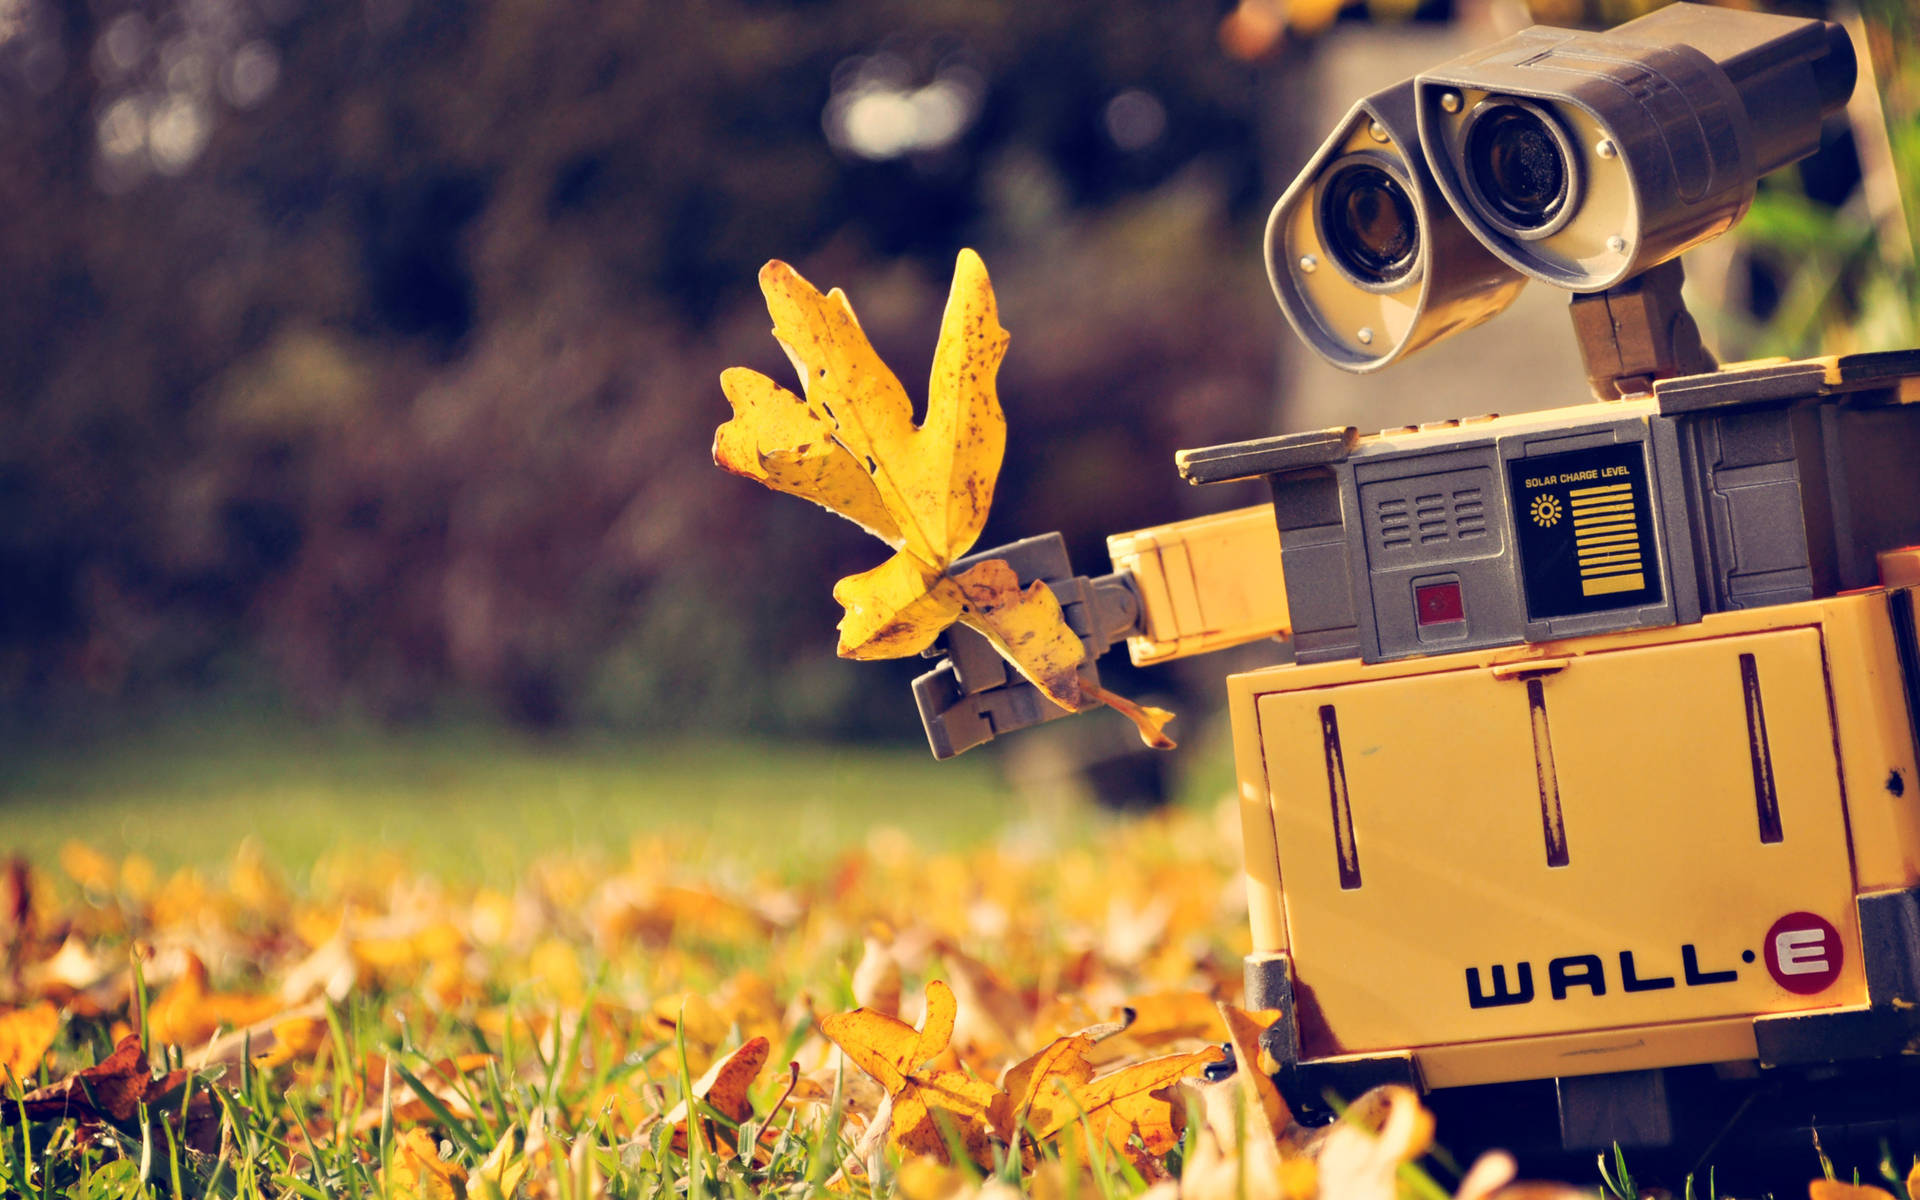 WALL E With Autumn Leaves Wallpaper